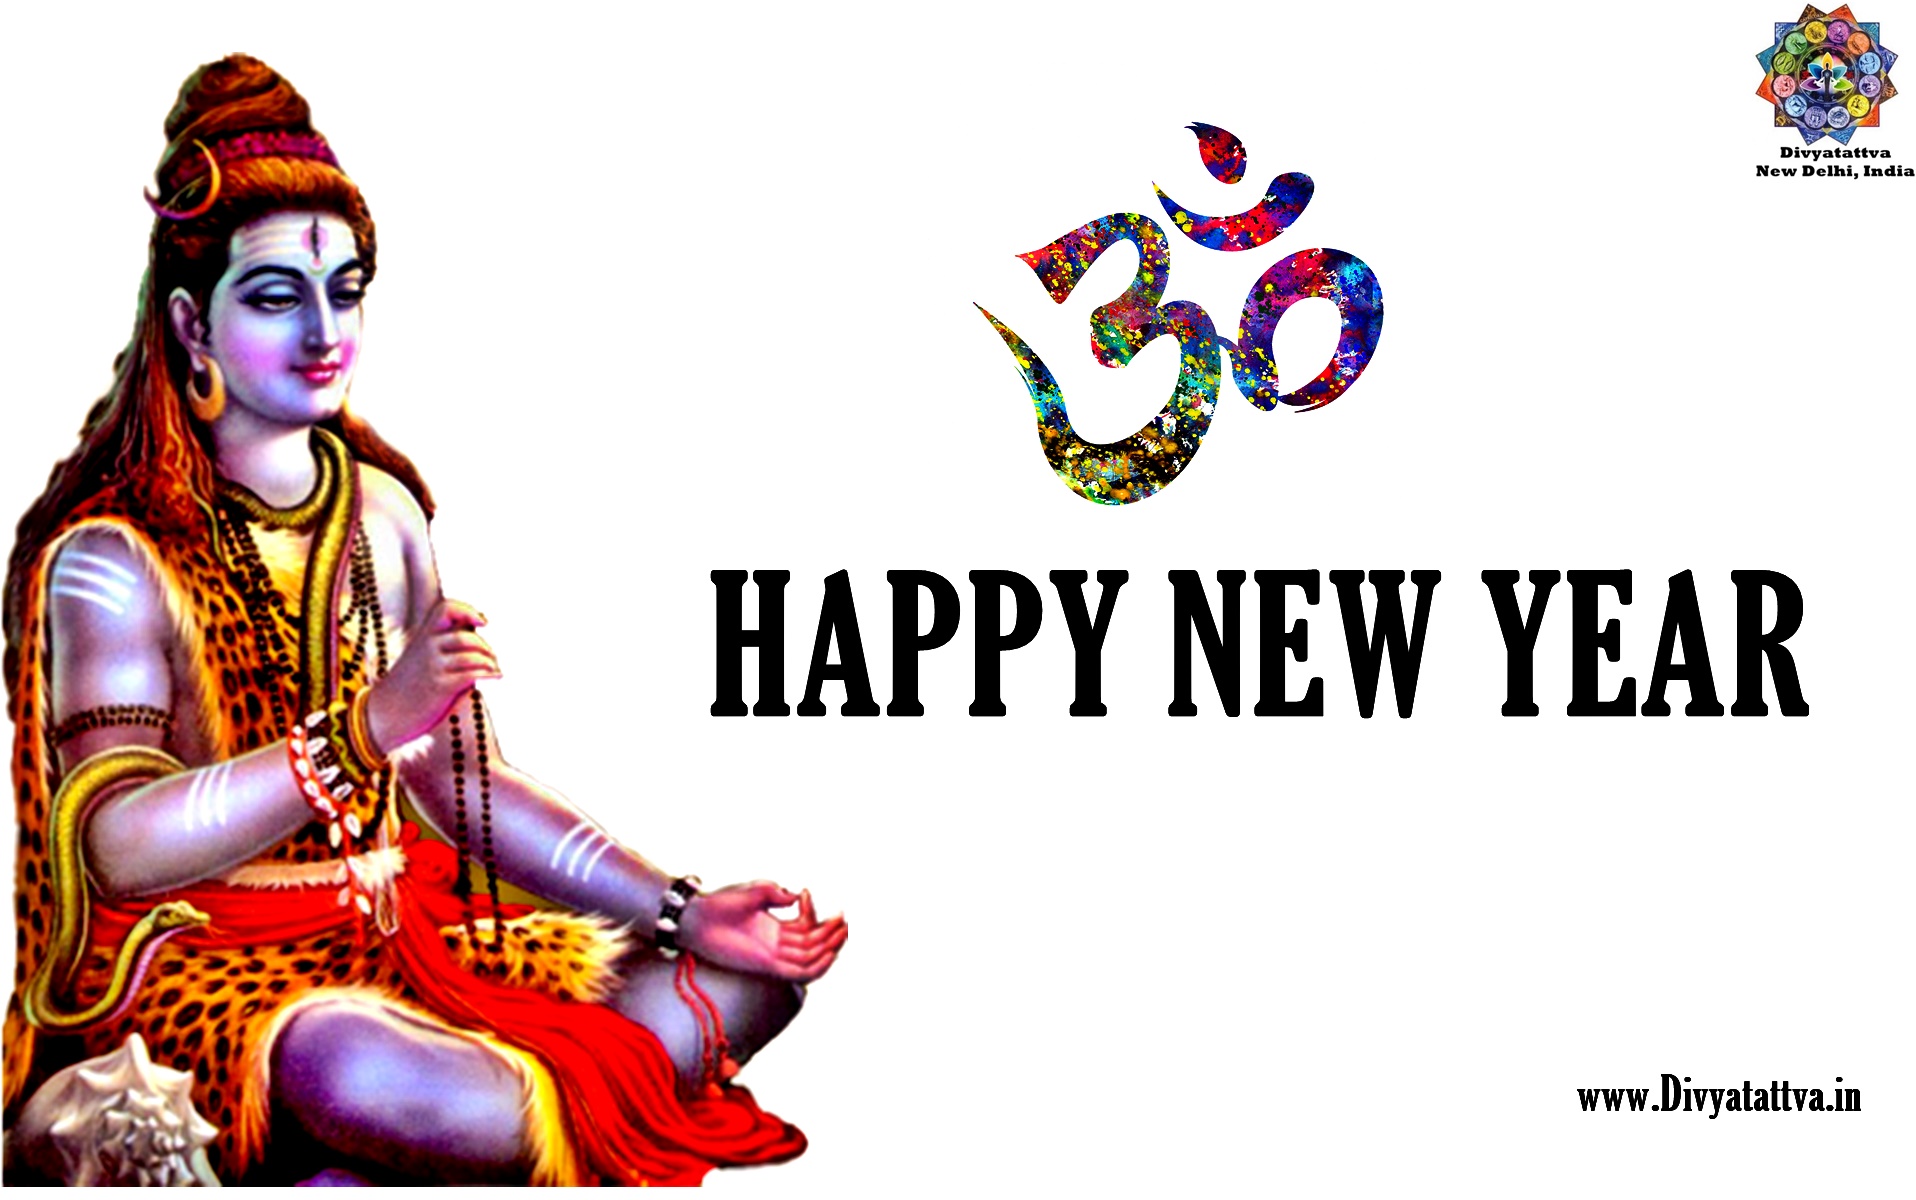 New Year Greetings wallpapers Happy New Year Spiritual Messages Hd Images